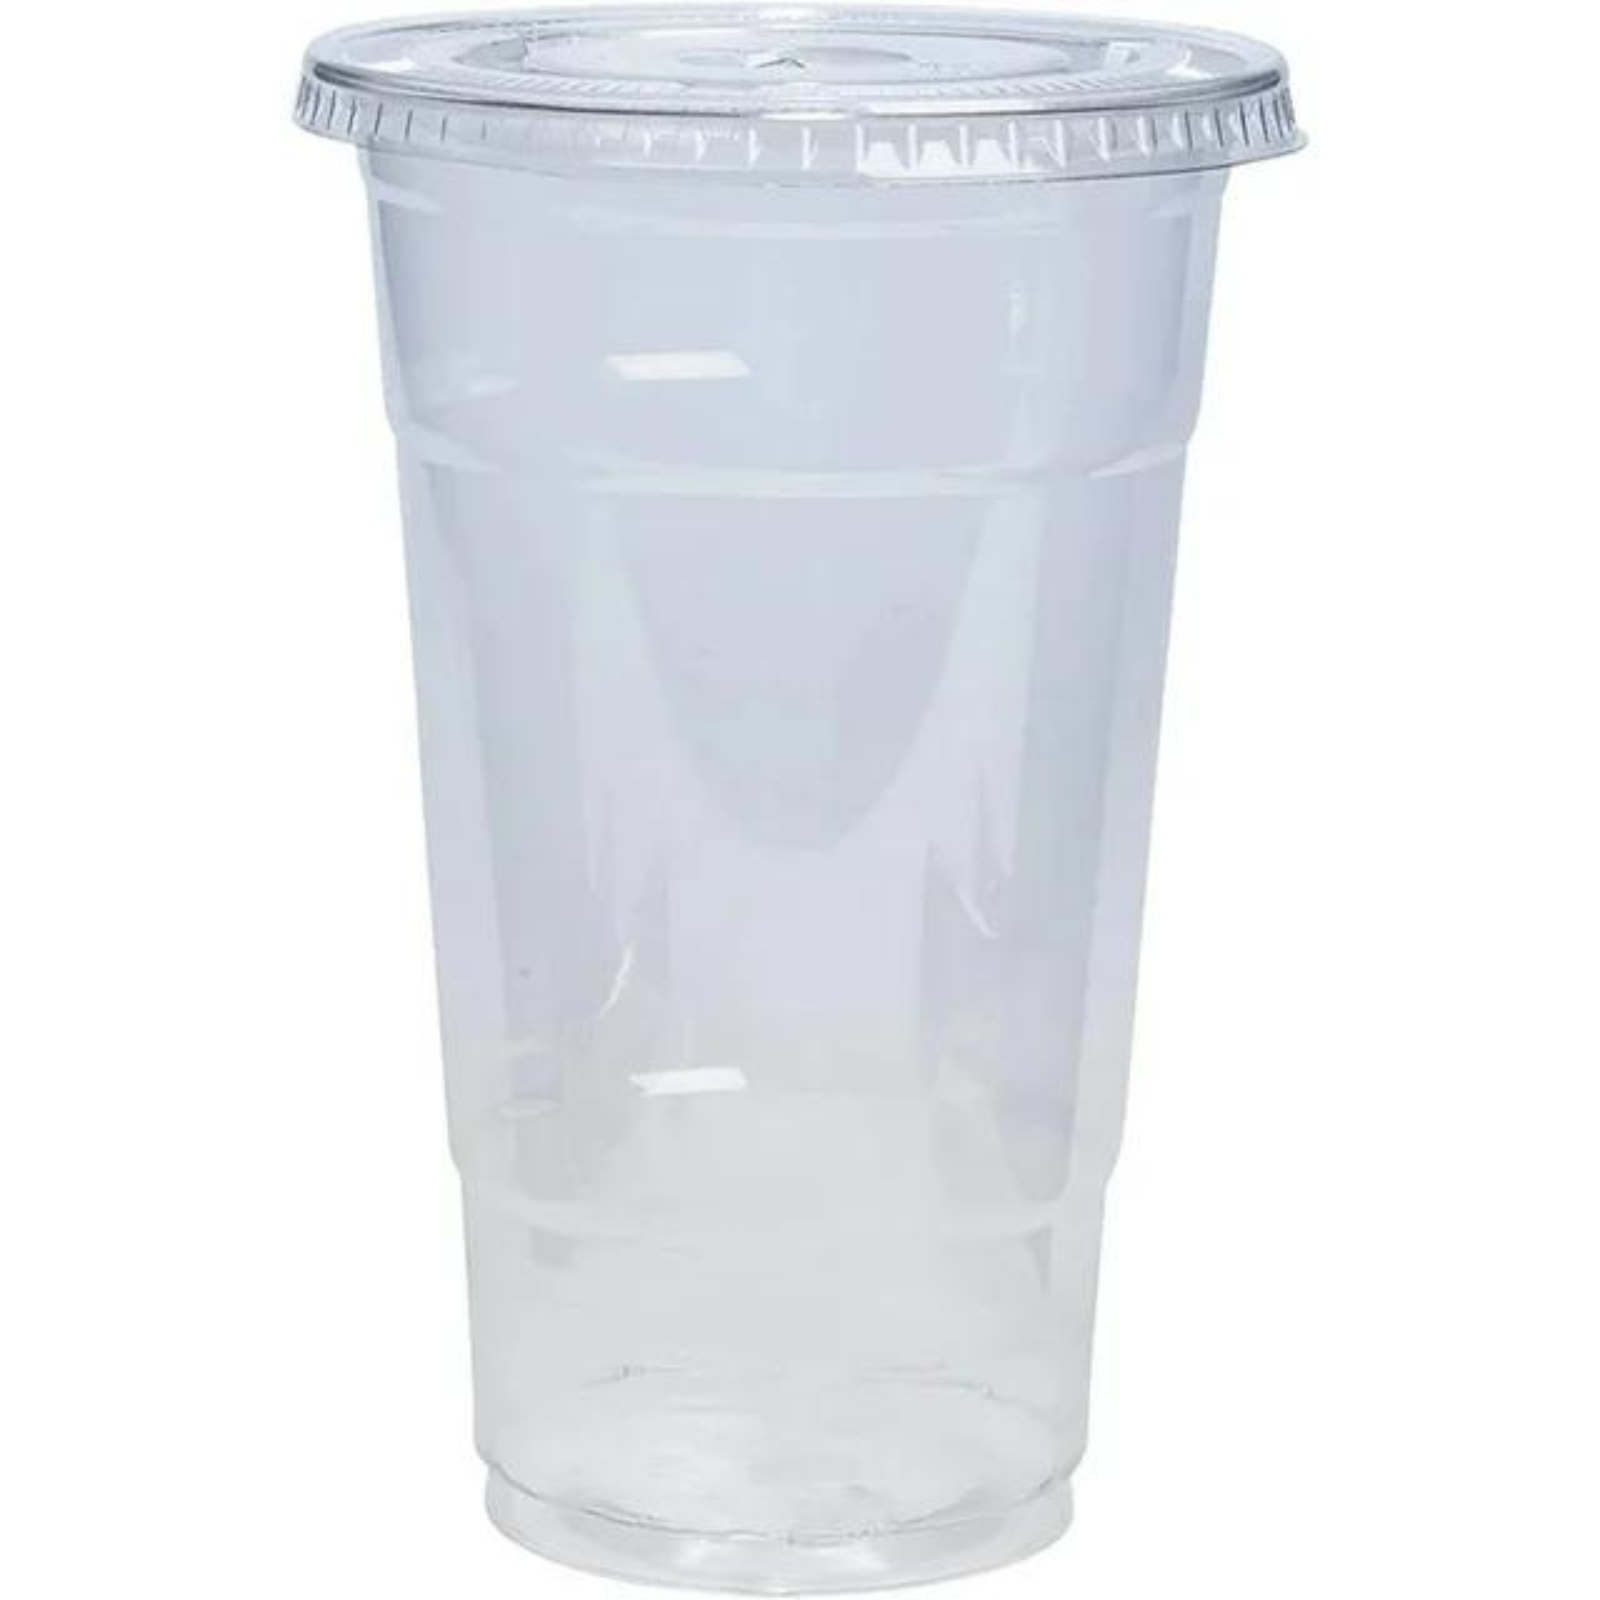 24oz Plastic Clear PET Cups With Flat Lid & Straw, for All Kinds of Beverages Smoothie Cups VeZee Cups With Flat Lids 10 Pack 